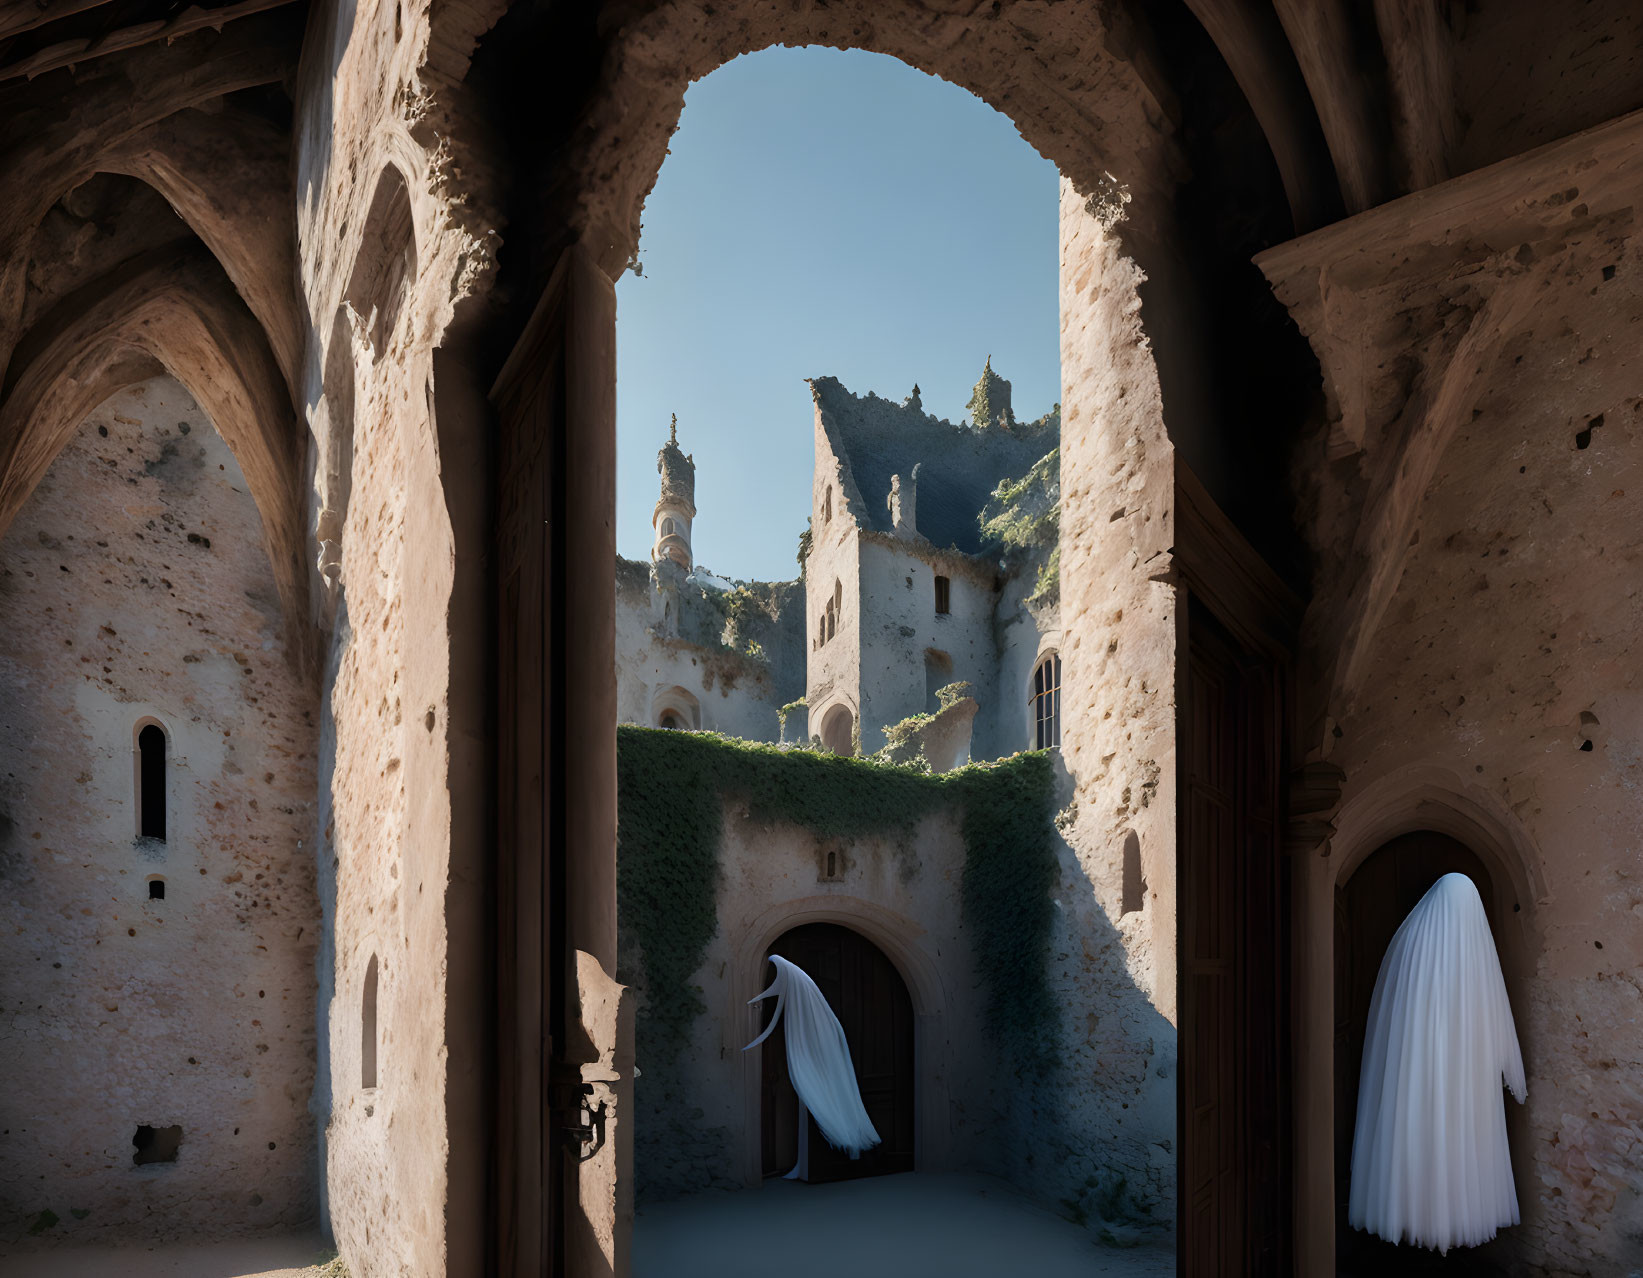 Abandoned castle with ivy-covered archway and white sculptures